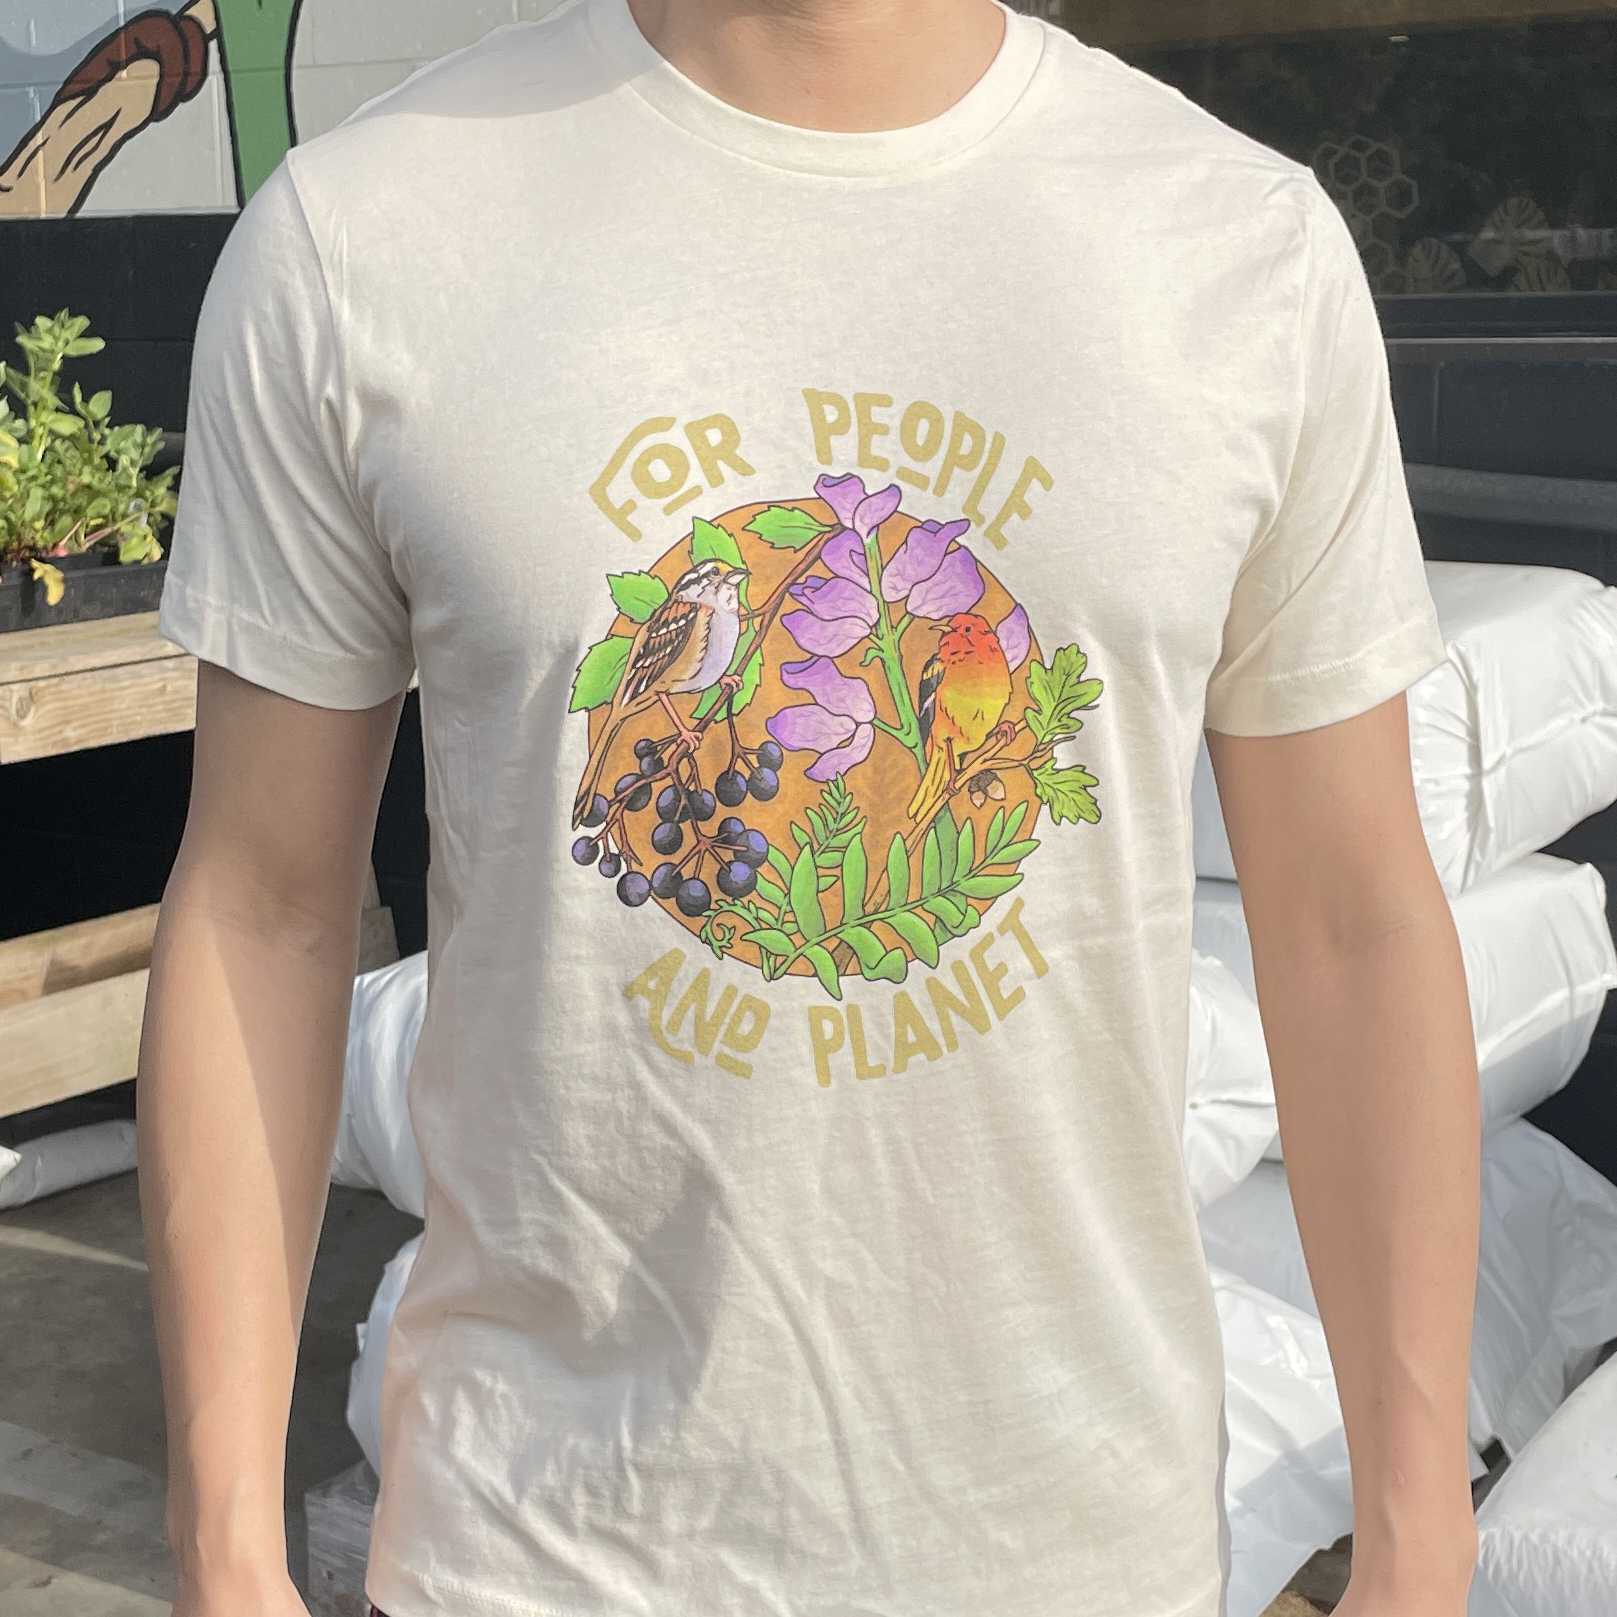 "For People and Planet" SymbiOp T-Shirt: Sparrow, Tanager, Elderberry, Lupine, Acorn, Fern, Full-color